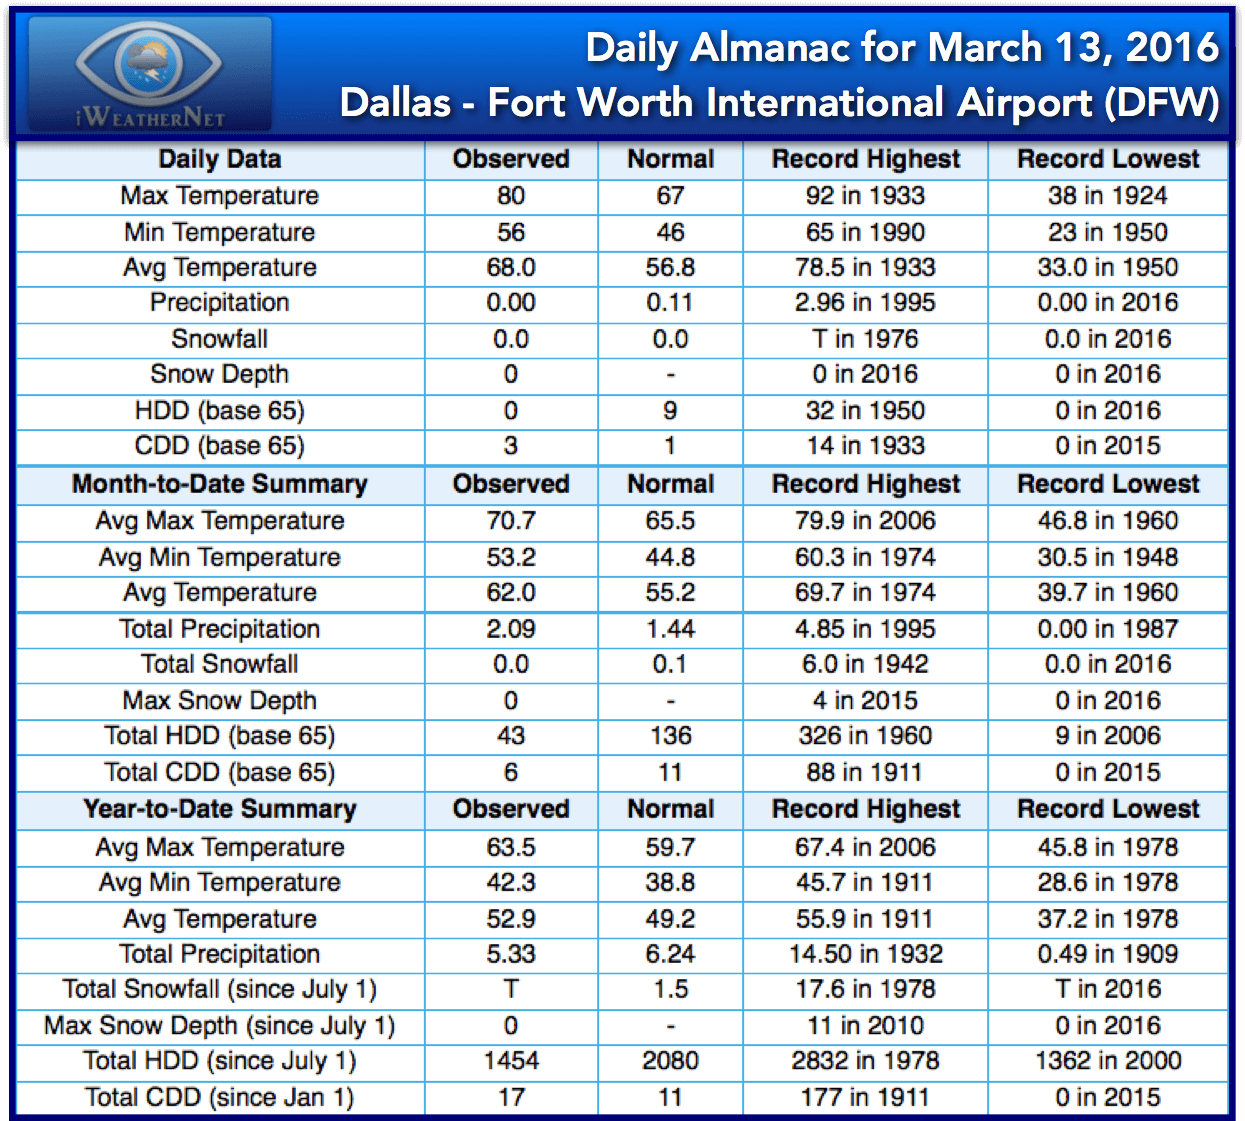 Daily Almanac for March 13, 2016 Dallas - Fort Worth International Airport (DFW)